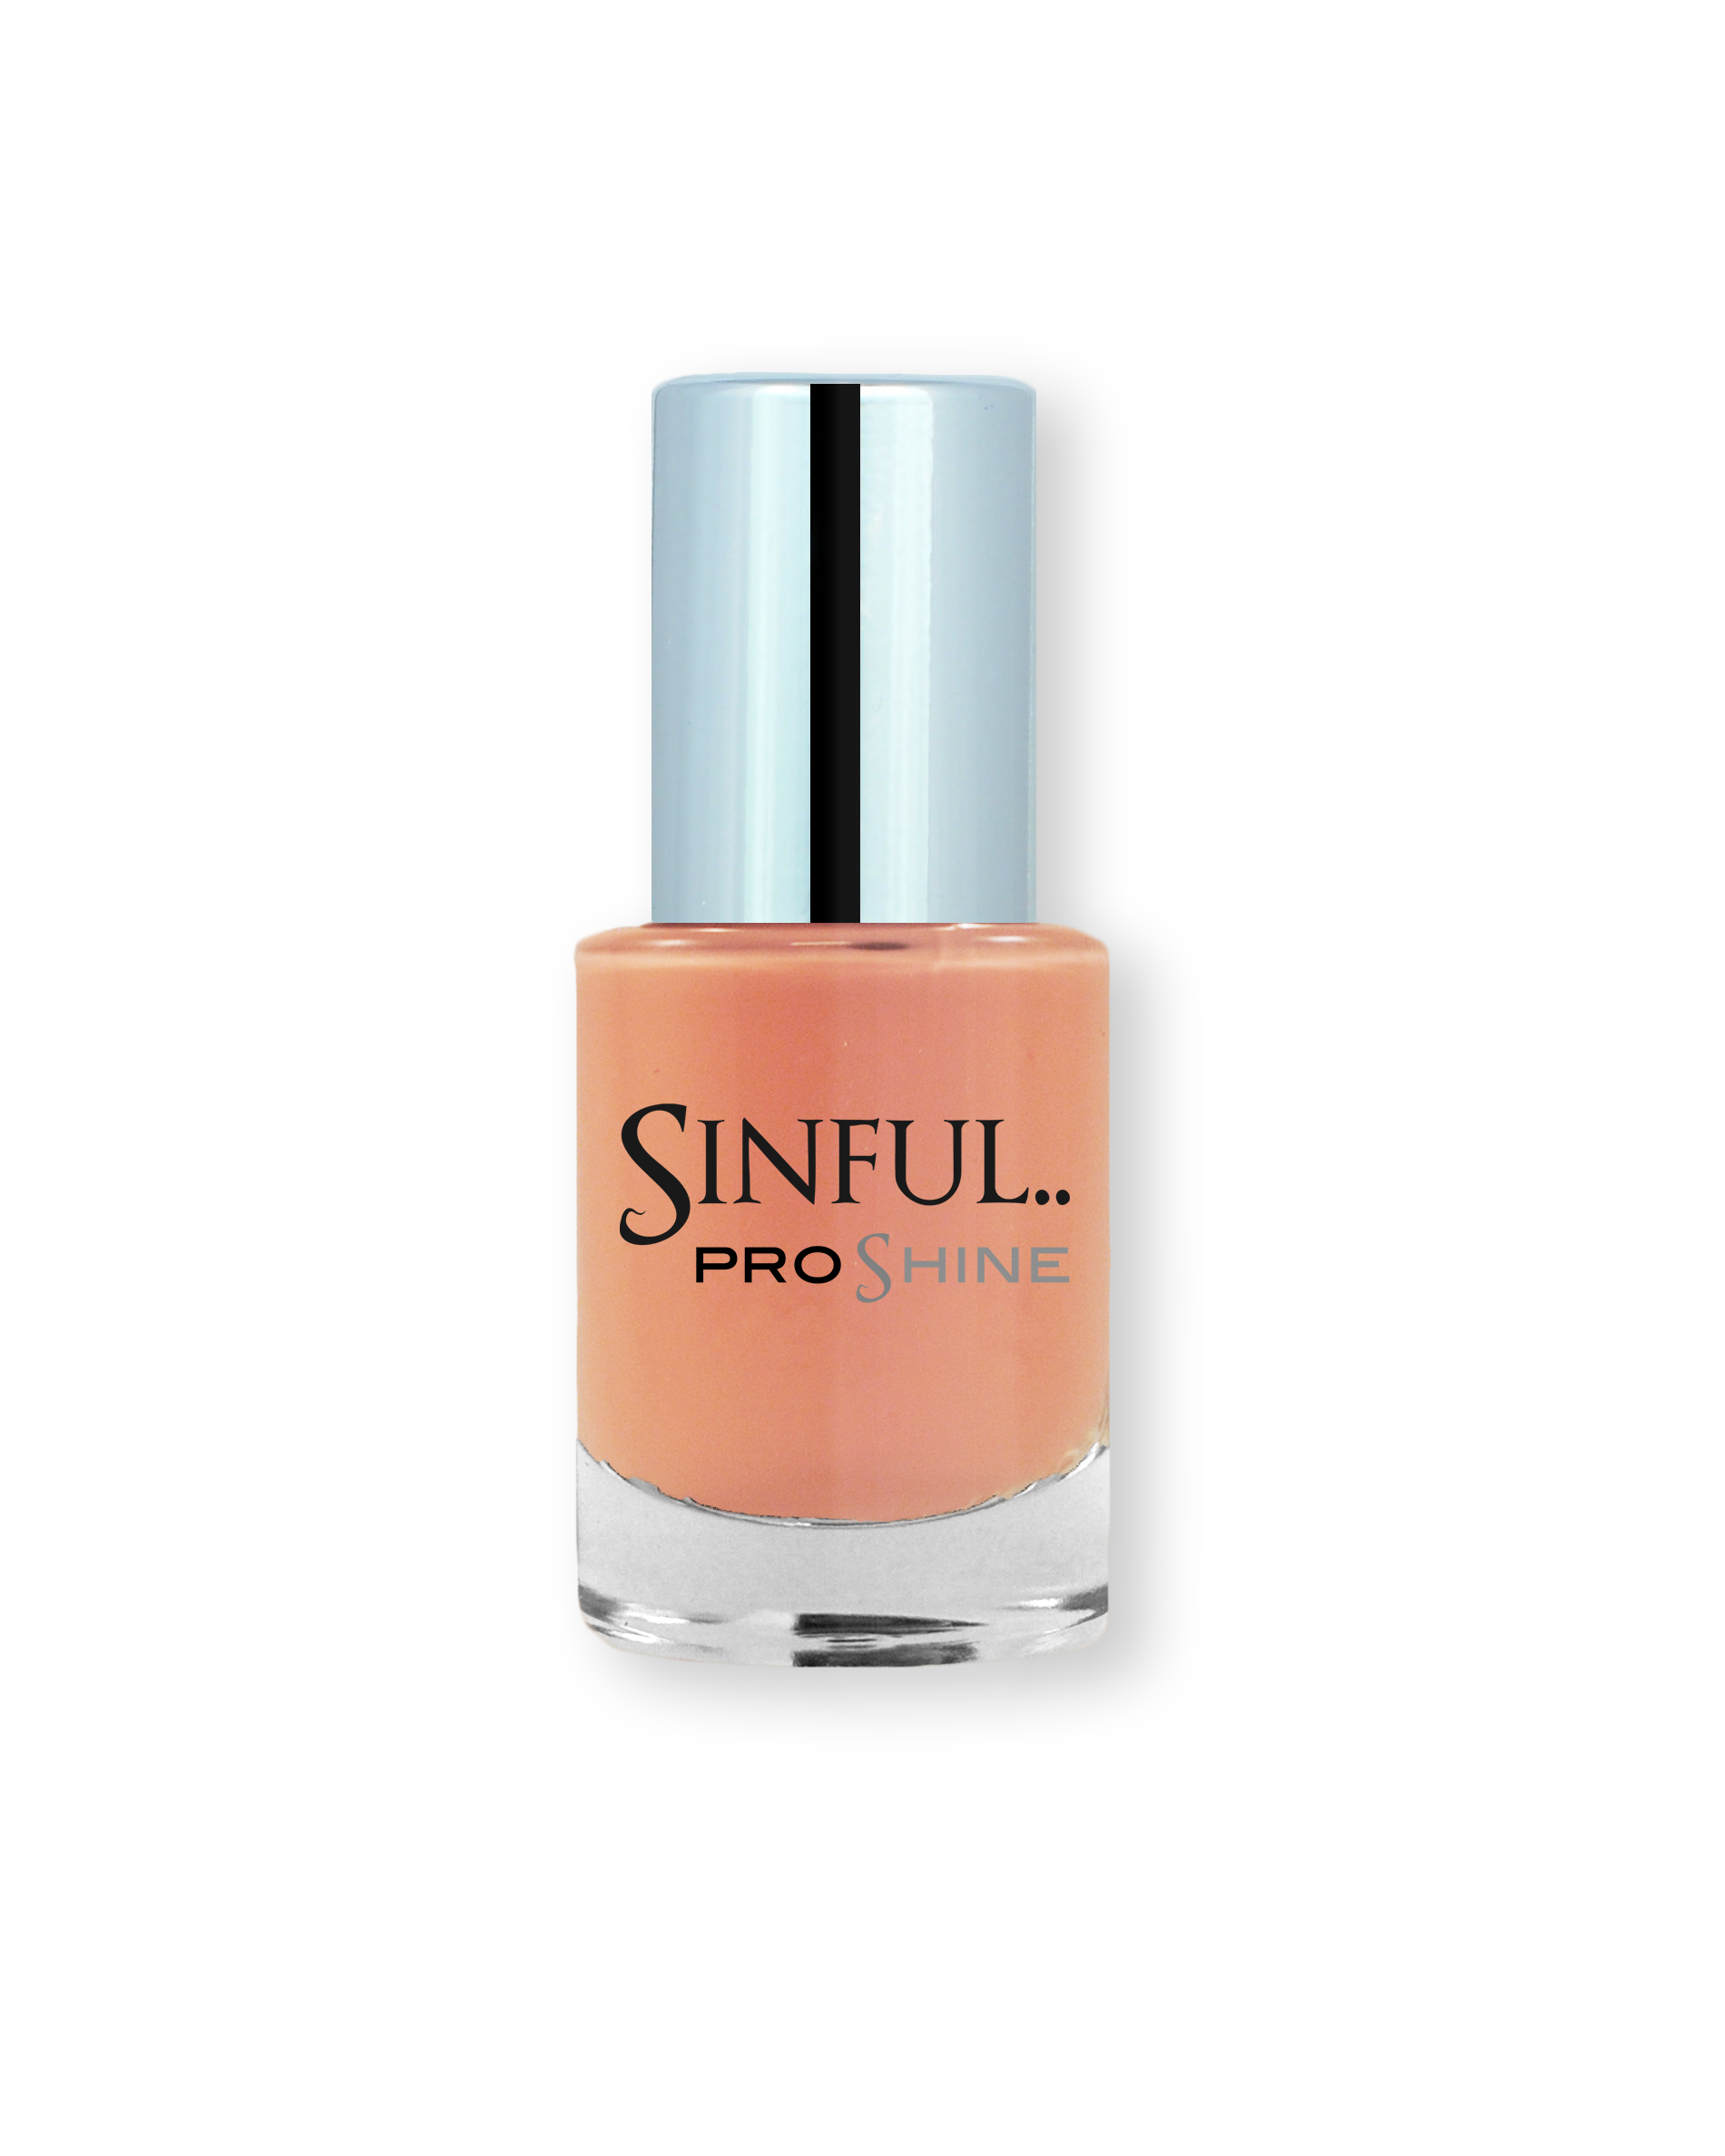 Pastel shades are no longer just for Spring and our perfect pastel peach is just the shade to prove it! A brilliant full coverage shade.